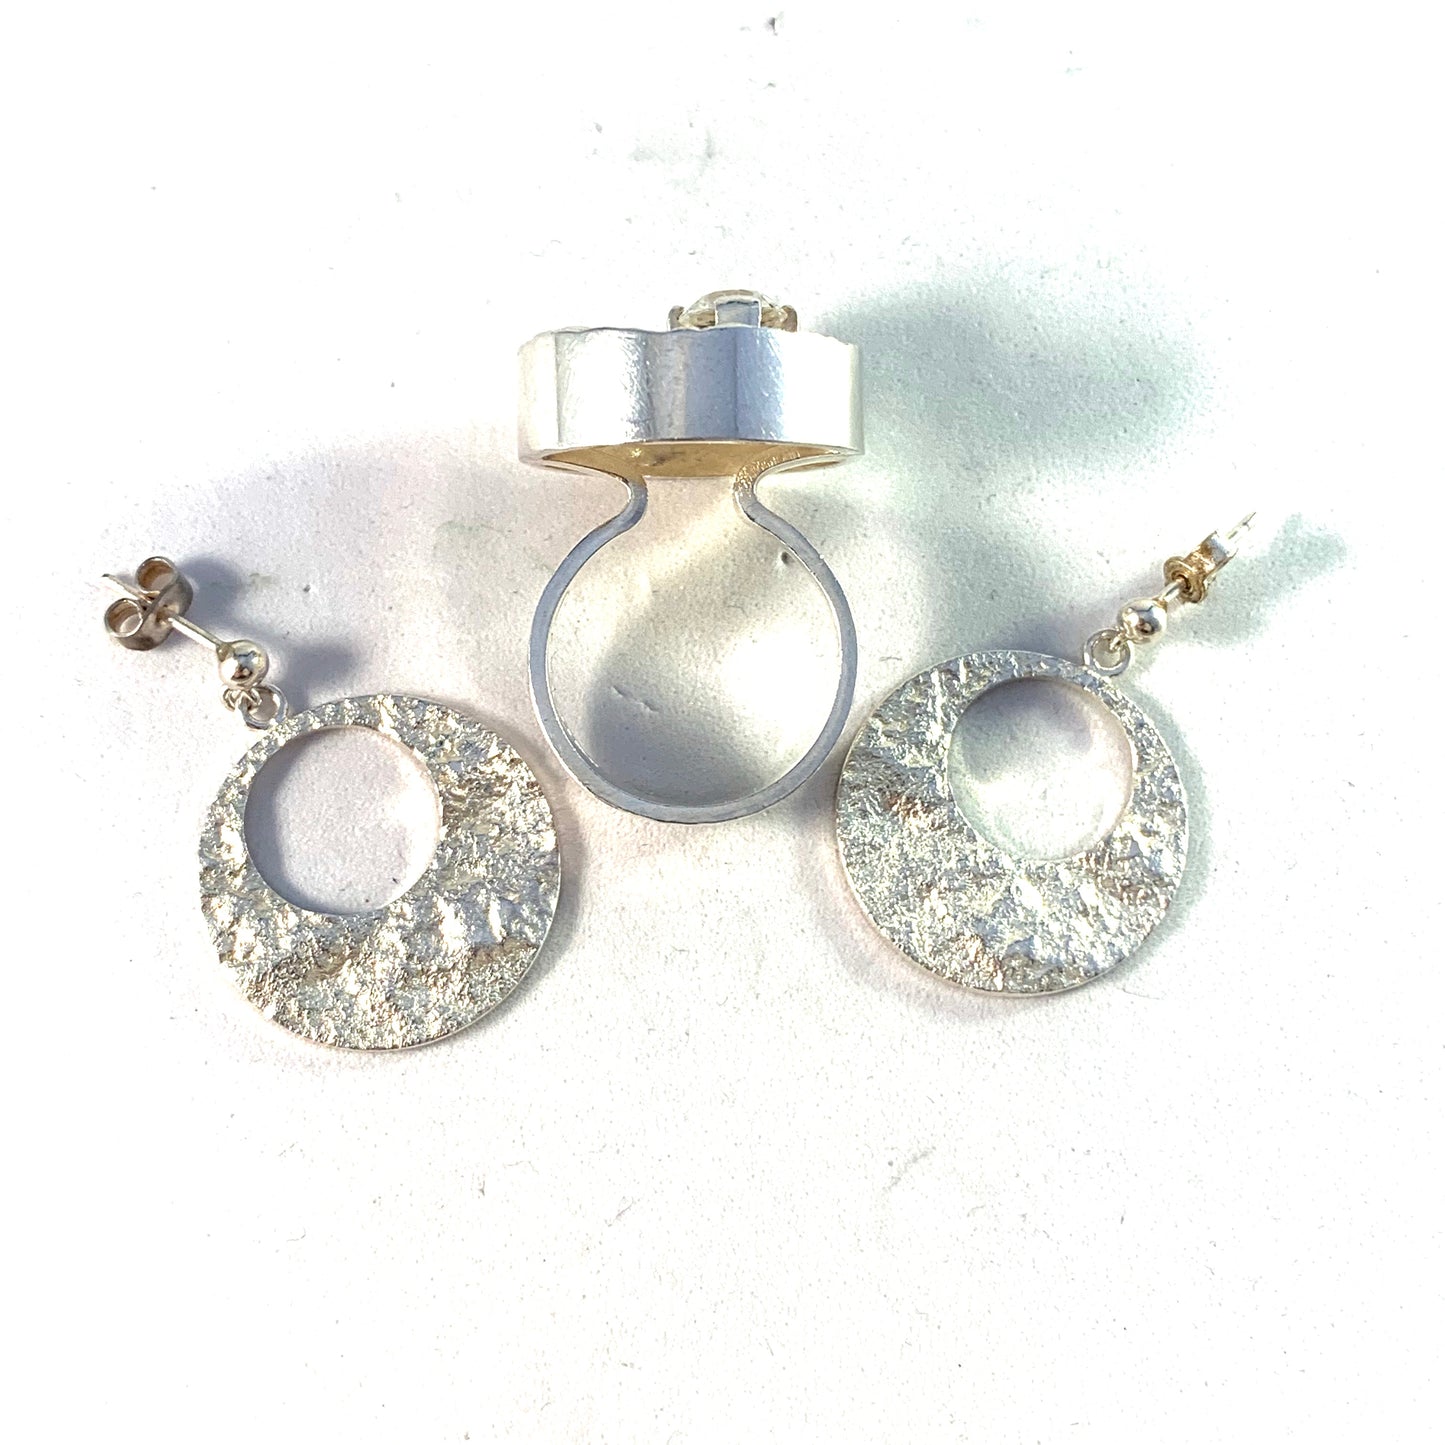 Ceson, Sweden 1969 Space Age Sterling Silver Rock Crystal Ring and Earrings.